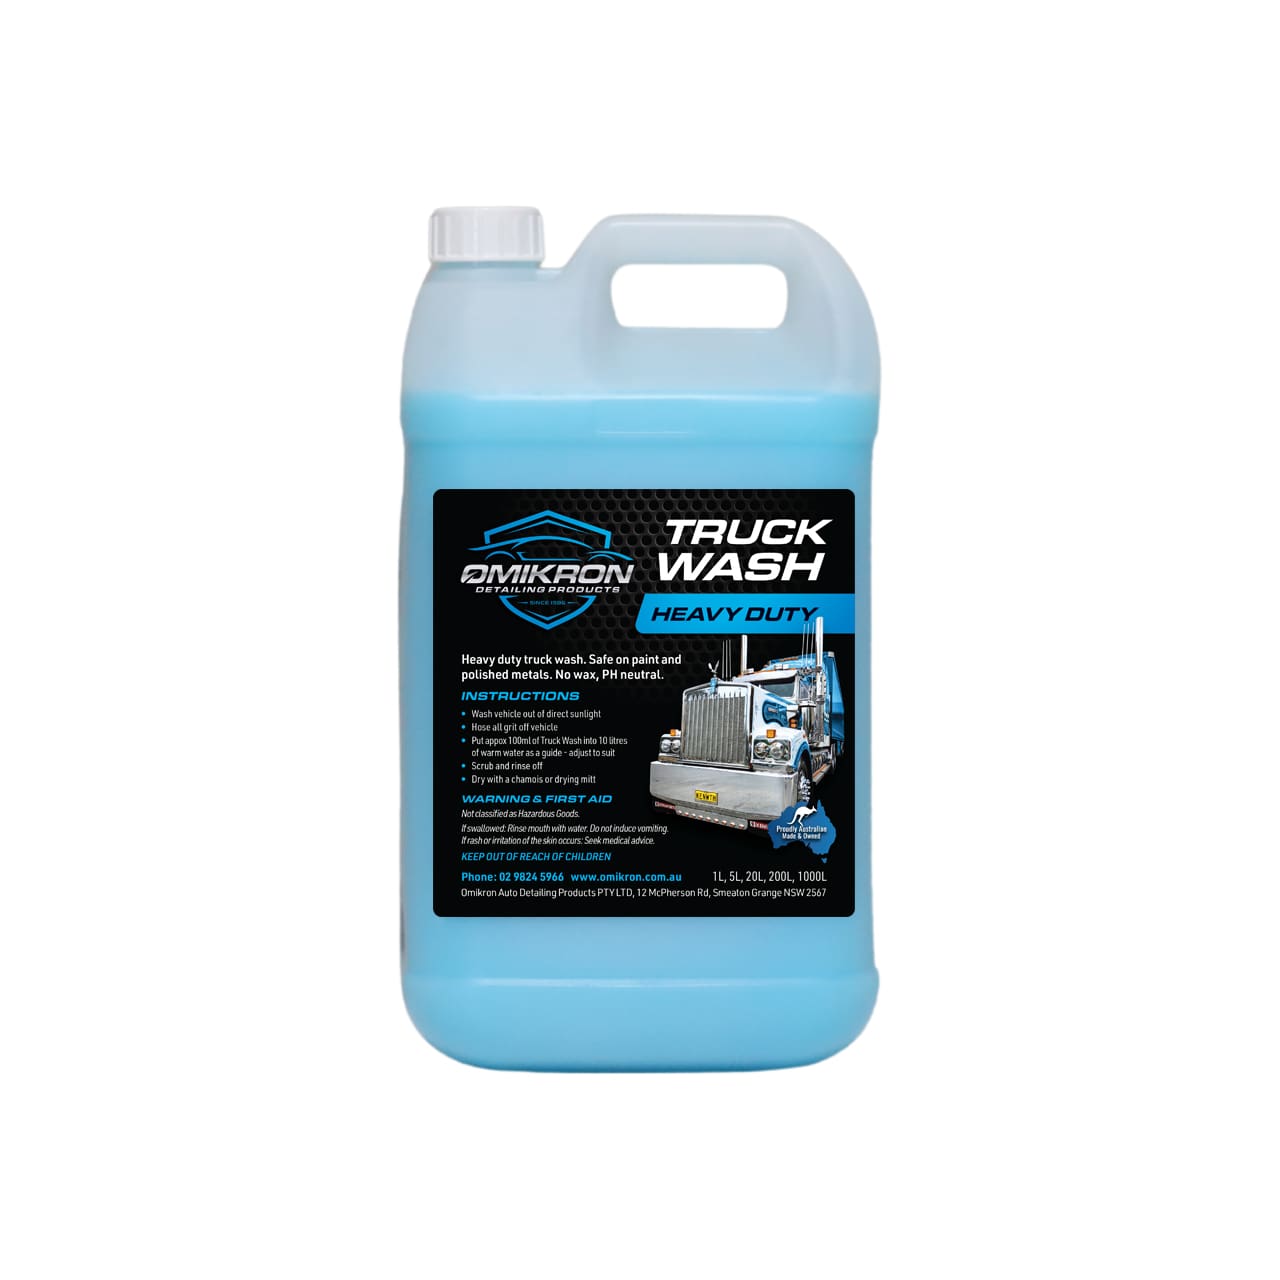 Truck Interior Cleaning Products, Australia